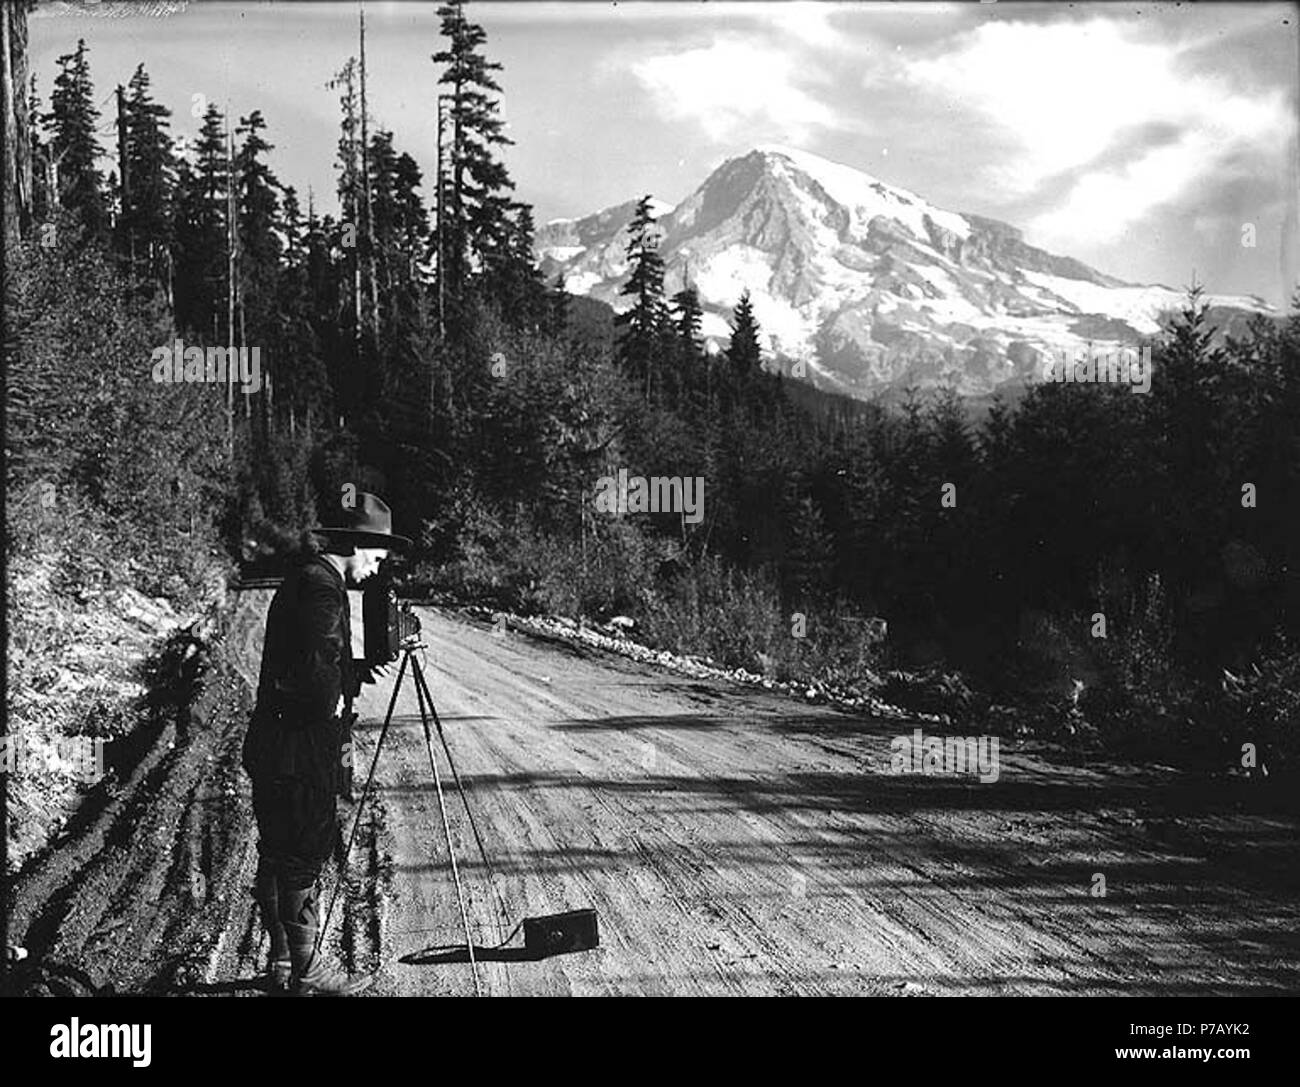 . English: Man with camera and tripod photographing views in Mount Rainier National Park, Washington, ca. 1907. English: Made for an Eastman Co. advertisement On sleeve of negative: Mt. Tacoma. Longmire. Man photographing on road showing summit for Kodak ad. Subjects (LCTGM): Mountains--Washington (State)--Mount Rainier National Park; Roads--Washington (State)--Mount Rainier National Park; Photographic apparatus & supplies; Advertising--Washington (State)--Mount Rainier National Park Subjects (LCSH): Rainier, Mount (Wash.); Kodak camera; Mount Rainier National Park (Wash.)  . circa 1907 54 Man Stock Photo